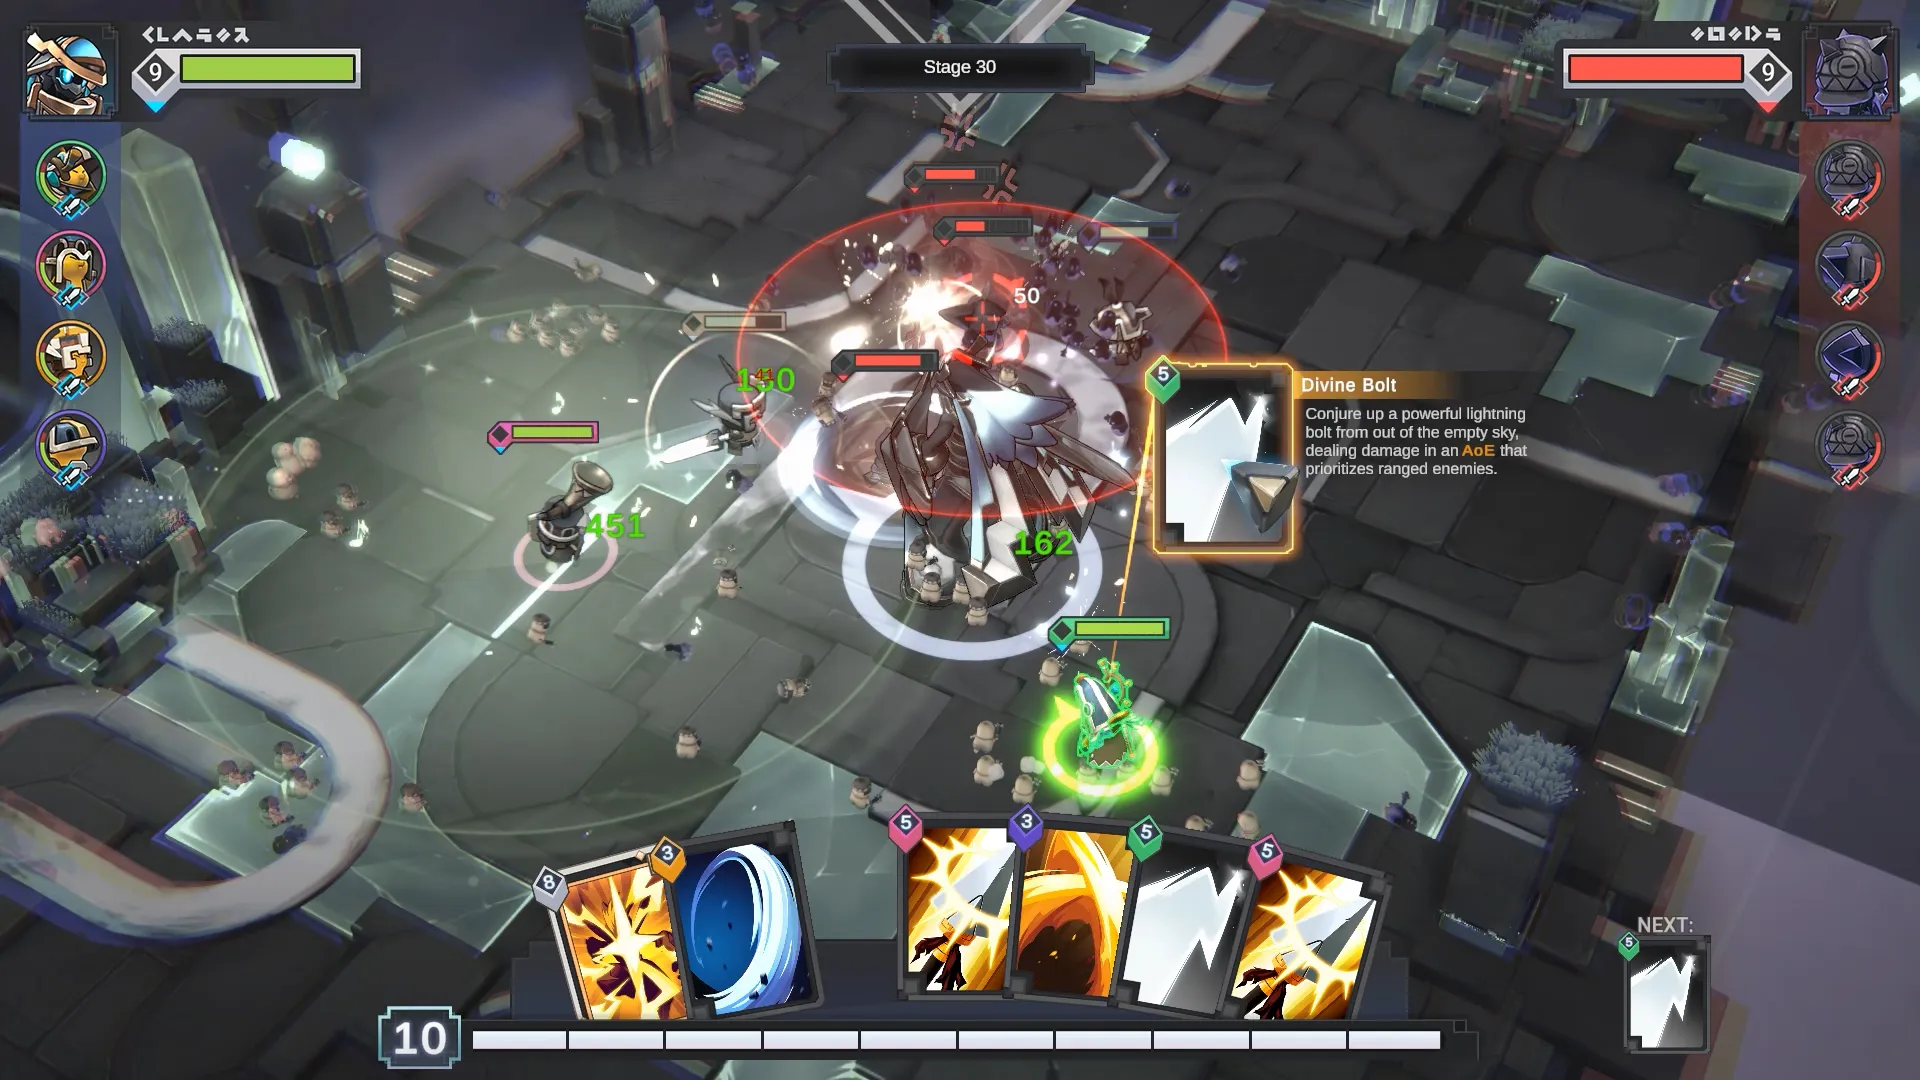 This Apeiron screenshot captures an intense battle scene, showcasing the various abilities players can use to fight against their enemies in the game.